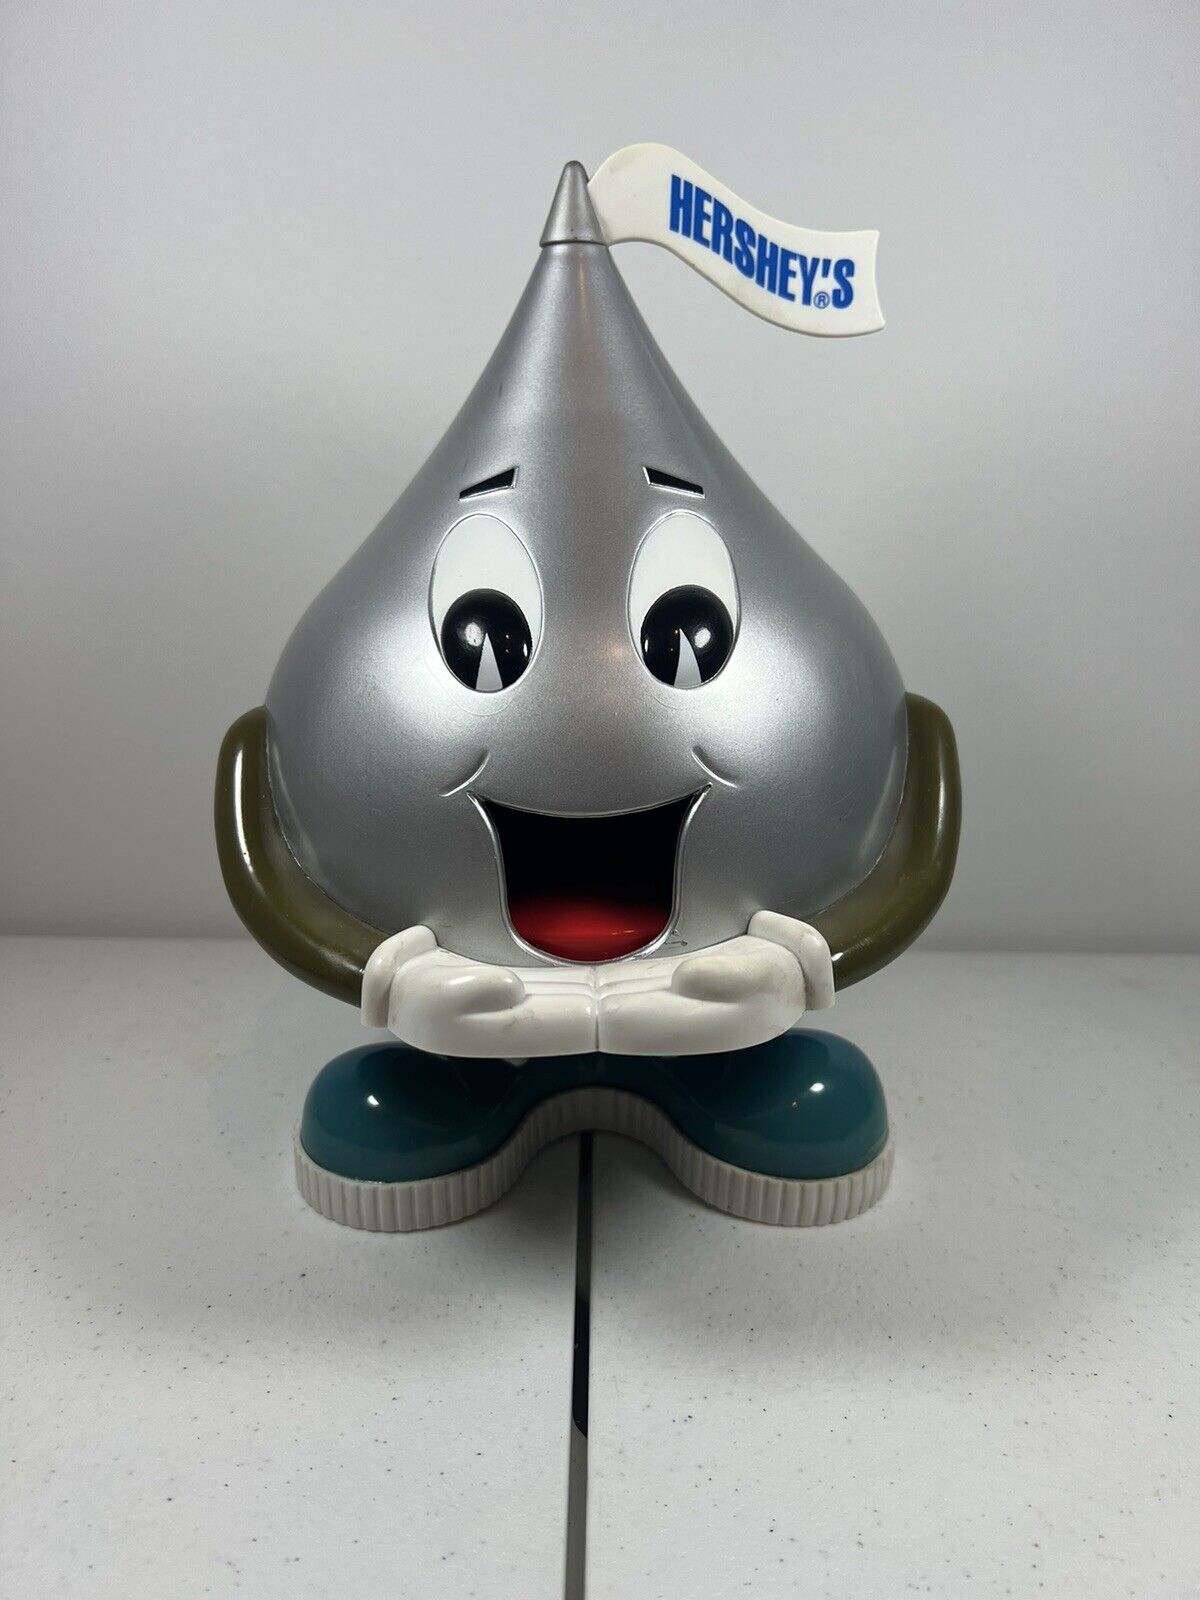 Vintage 1995 Hershey's Kiss Toy Candy Chocolate Kiss Dispenser